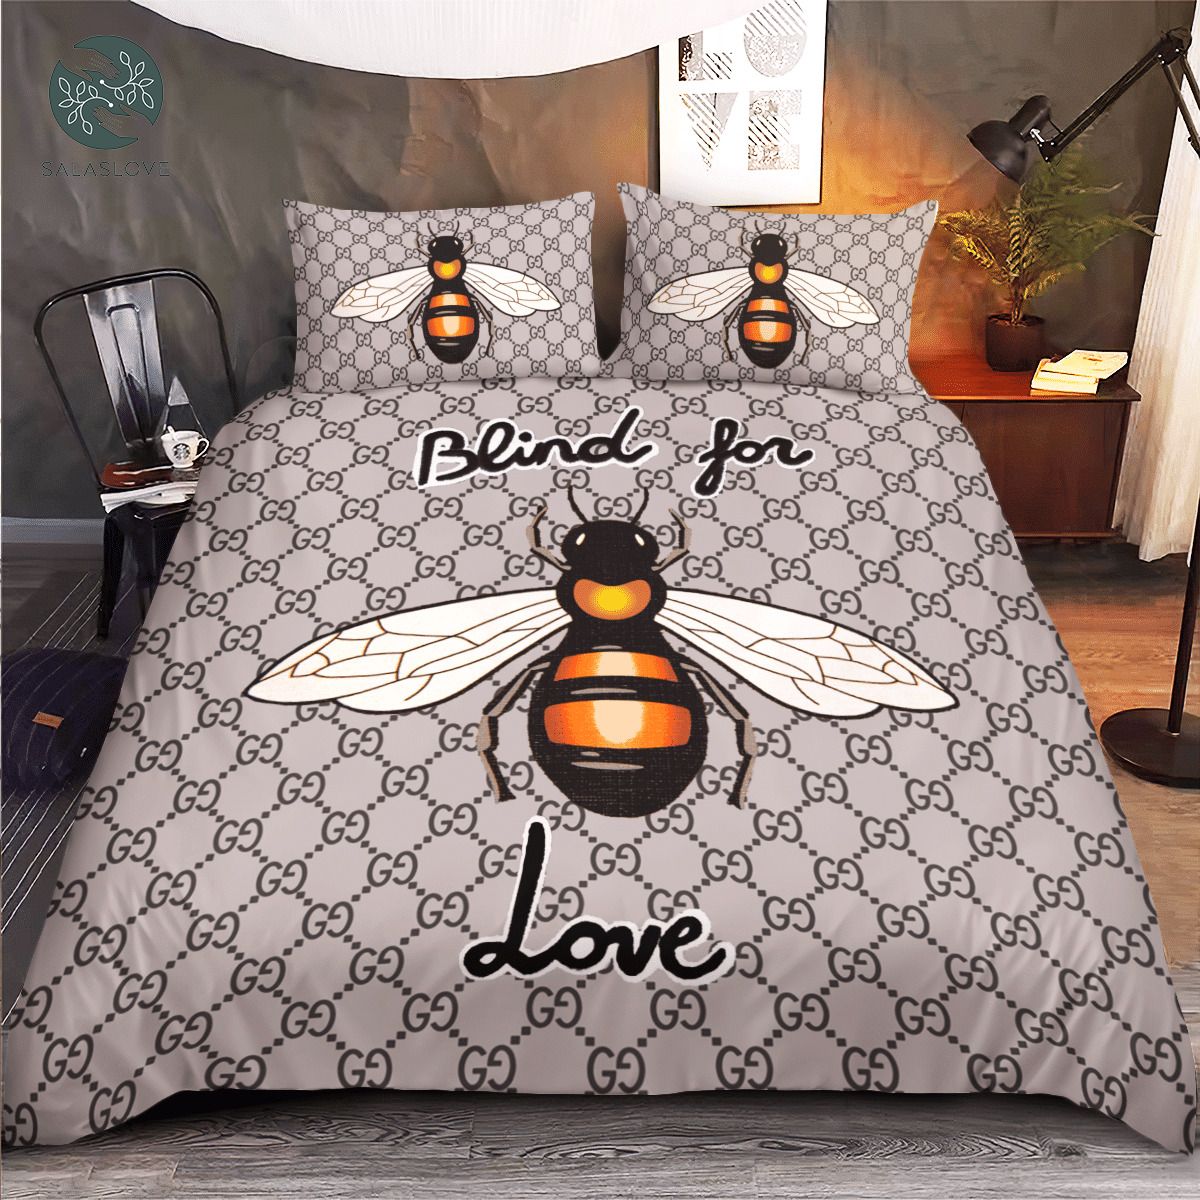 Gucci Bee Italian High-end Brand Bedding Sets